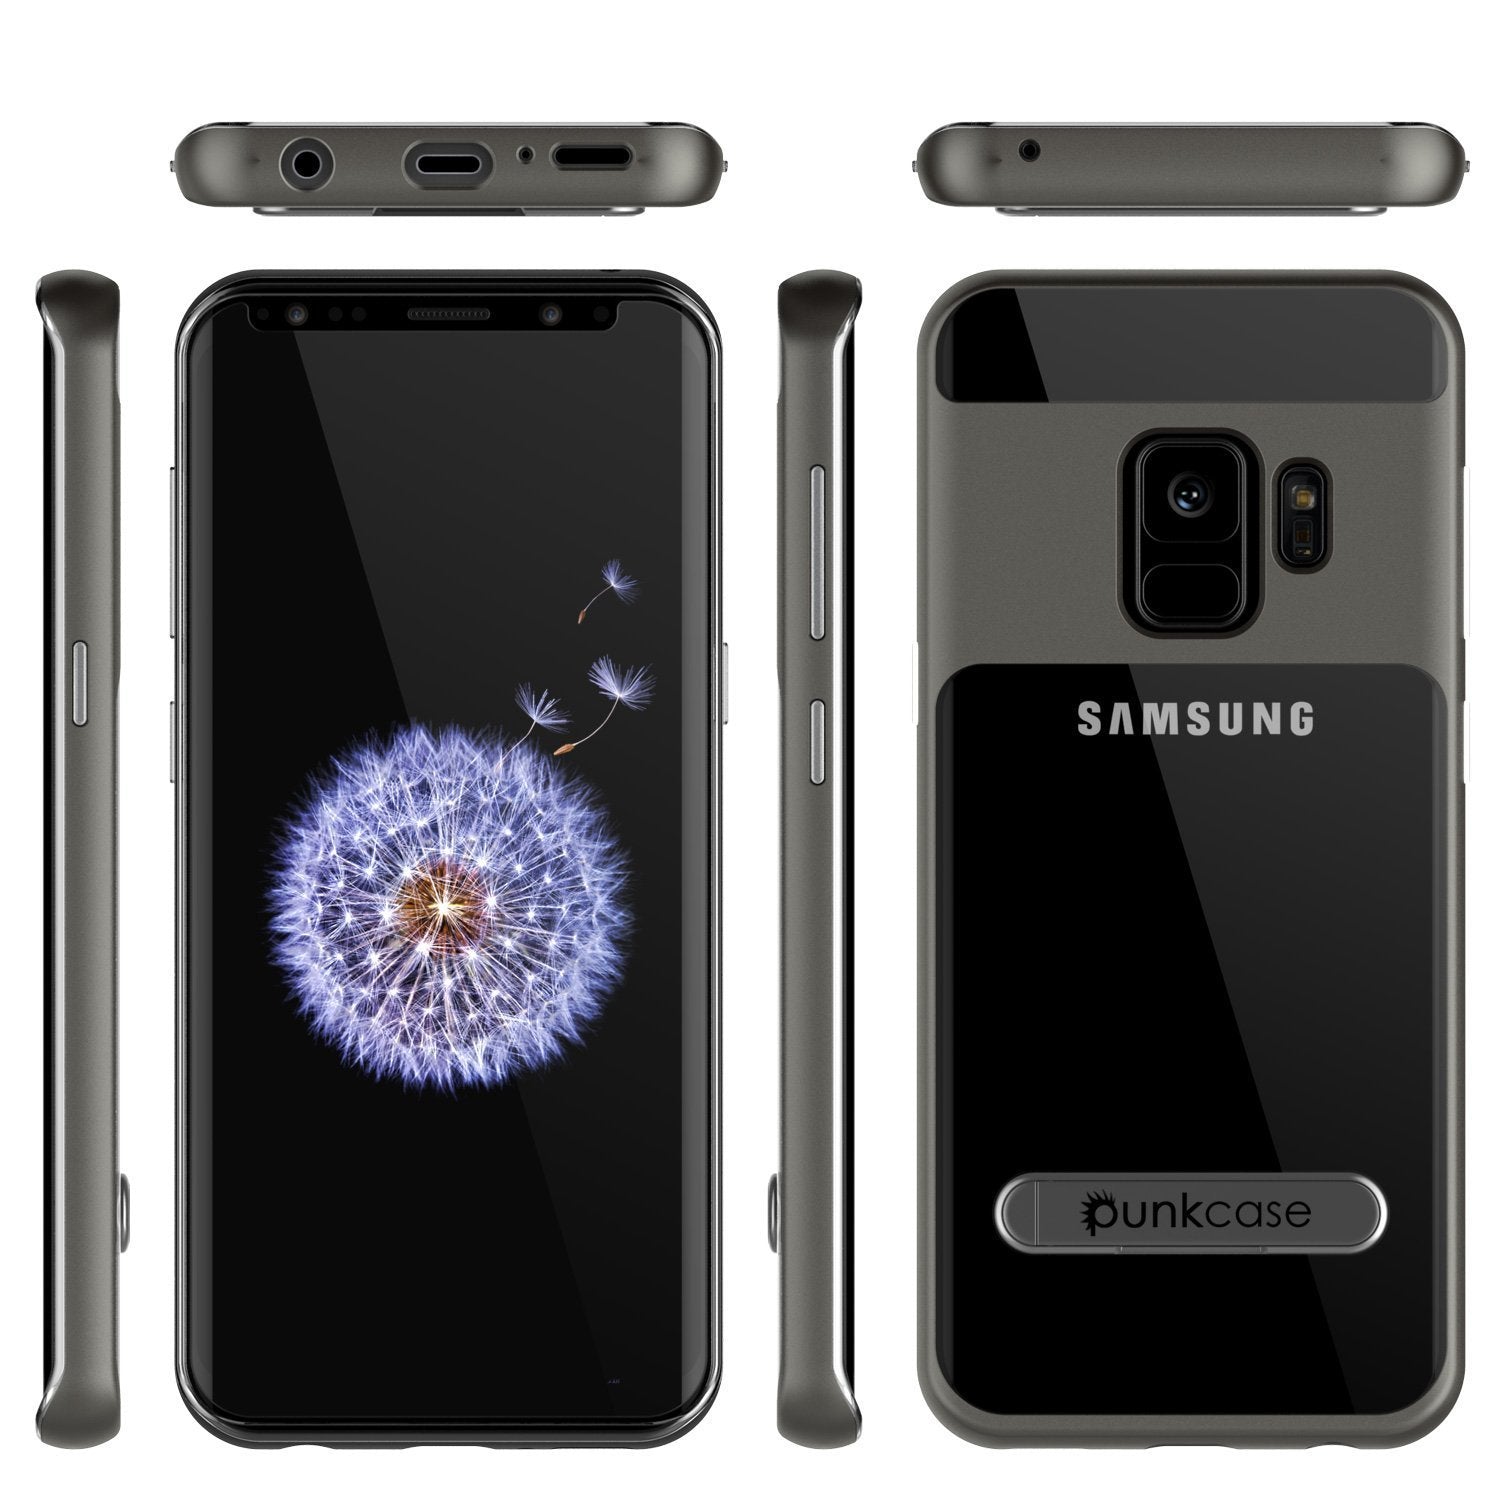 Galaxy S9 Case, PUNKcase [LUCID 3.0 Series] [Slim Fit] [Clear Back] Armor Cover w/ Integrated Kickstand, Anti-Shock System & PUNKSHIELD Screen Protector for Samsung Galaxy S9 [Grey]